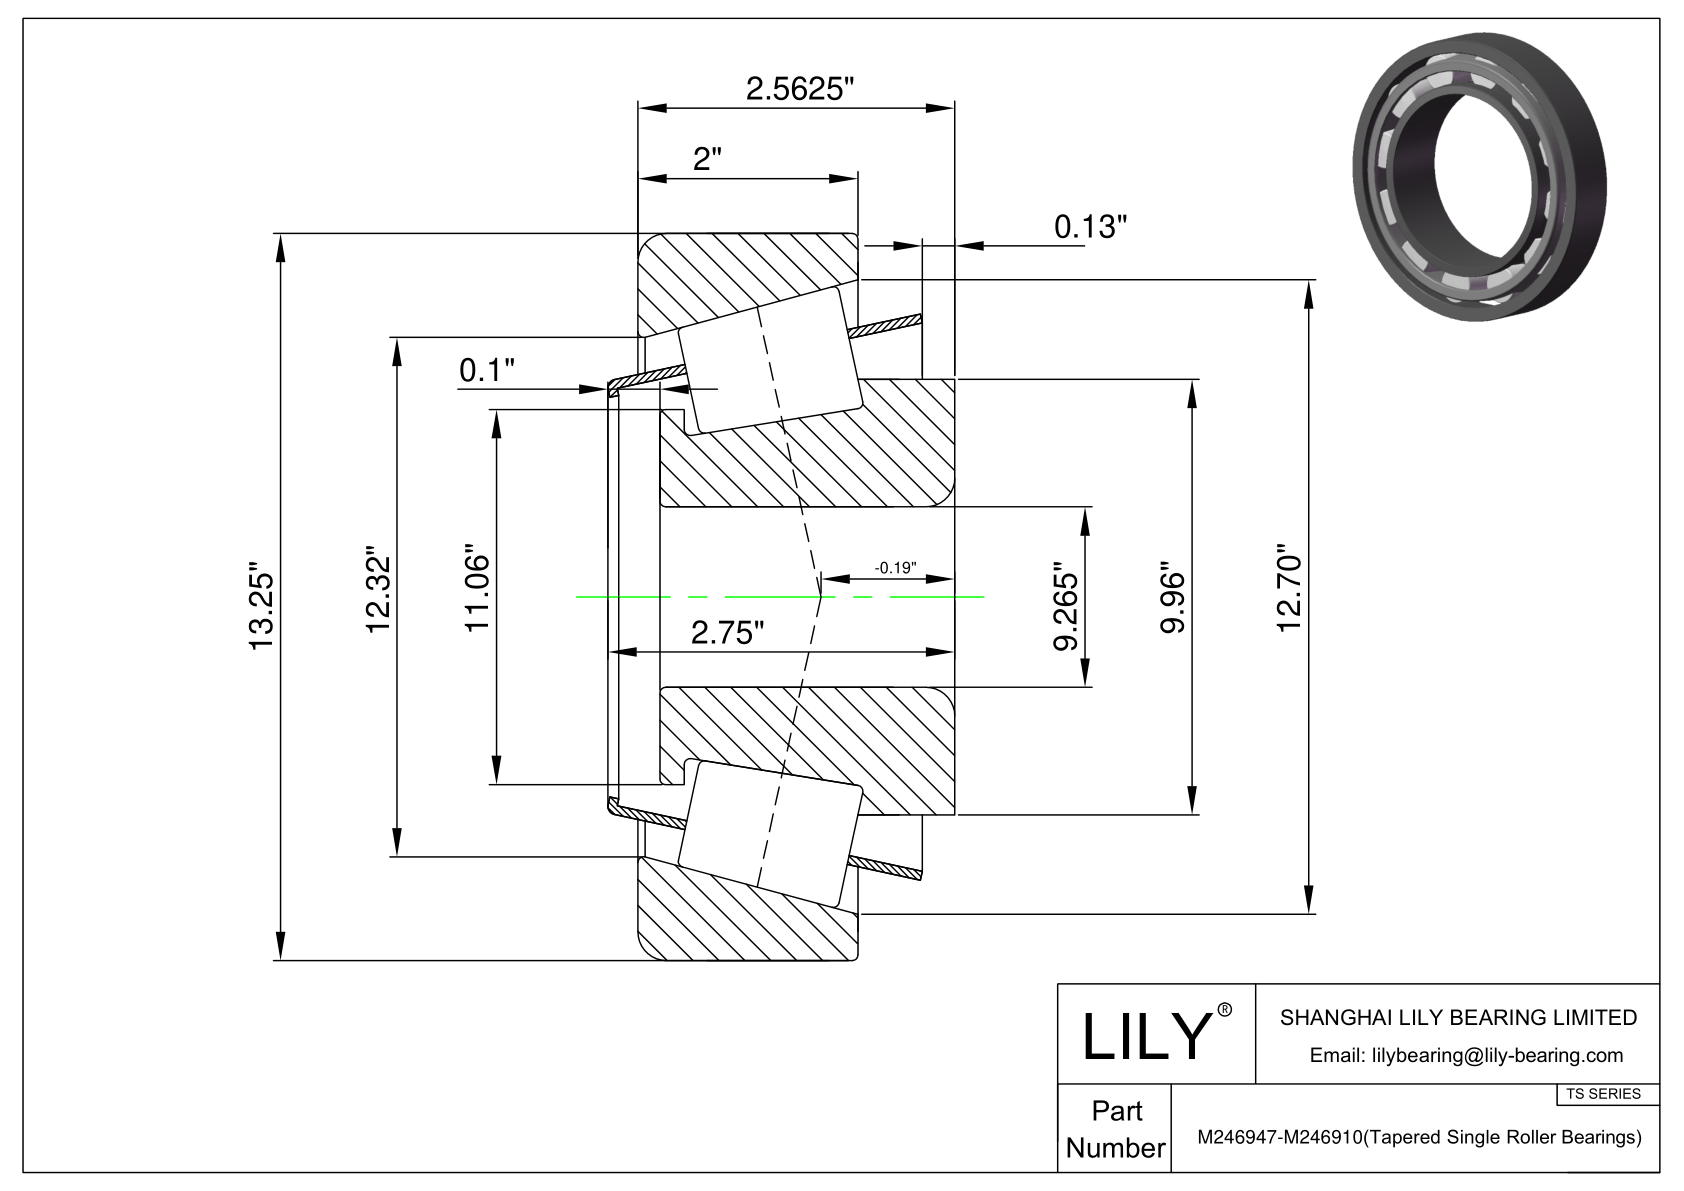 M246947-M246910 TS (Tapered Single Roller Bearings) (Imperial) cad drawing